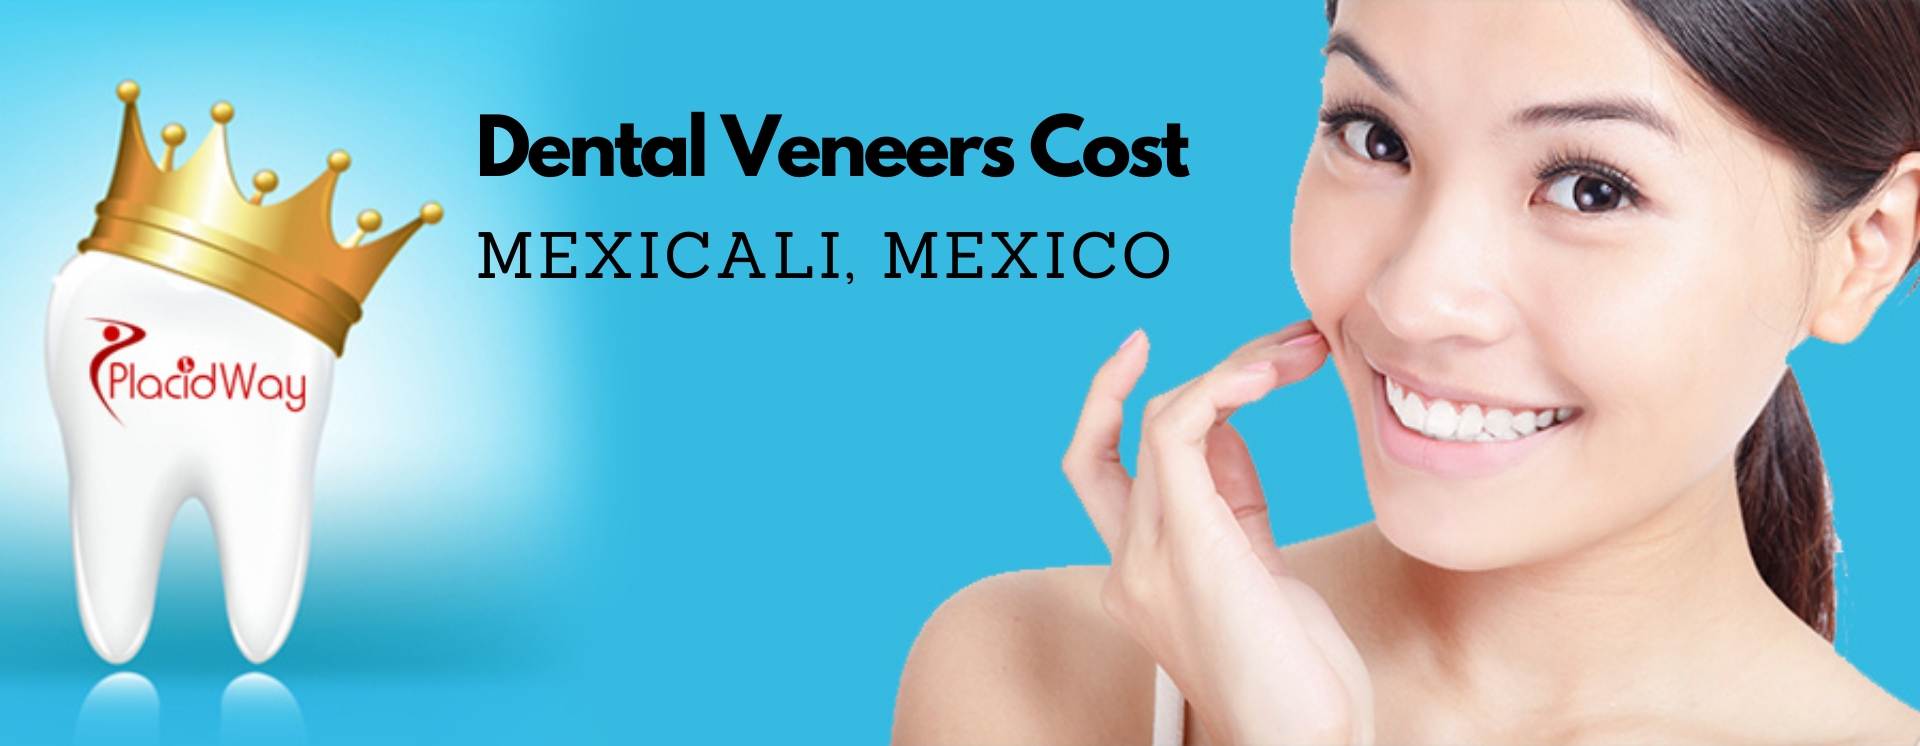 Dental Veneers Cost in Mexicali, Mexico